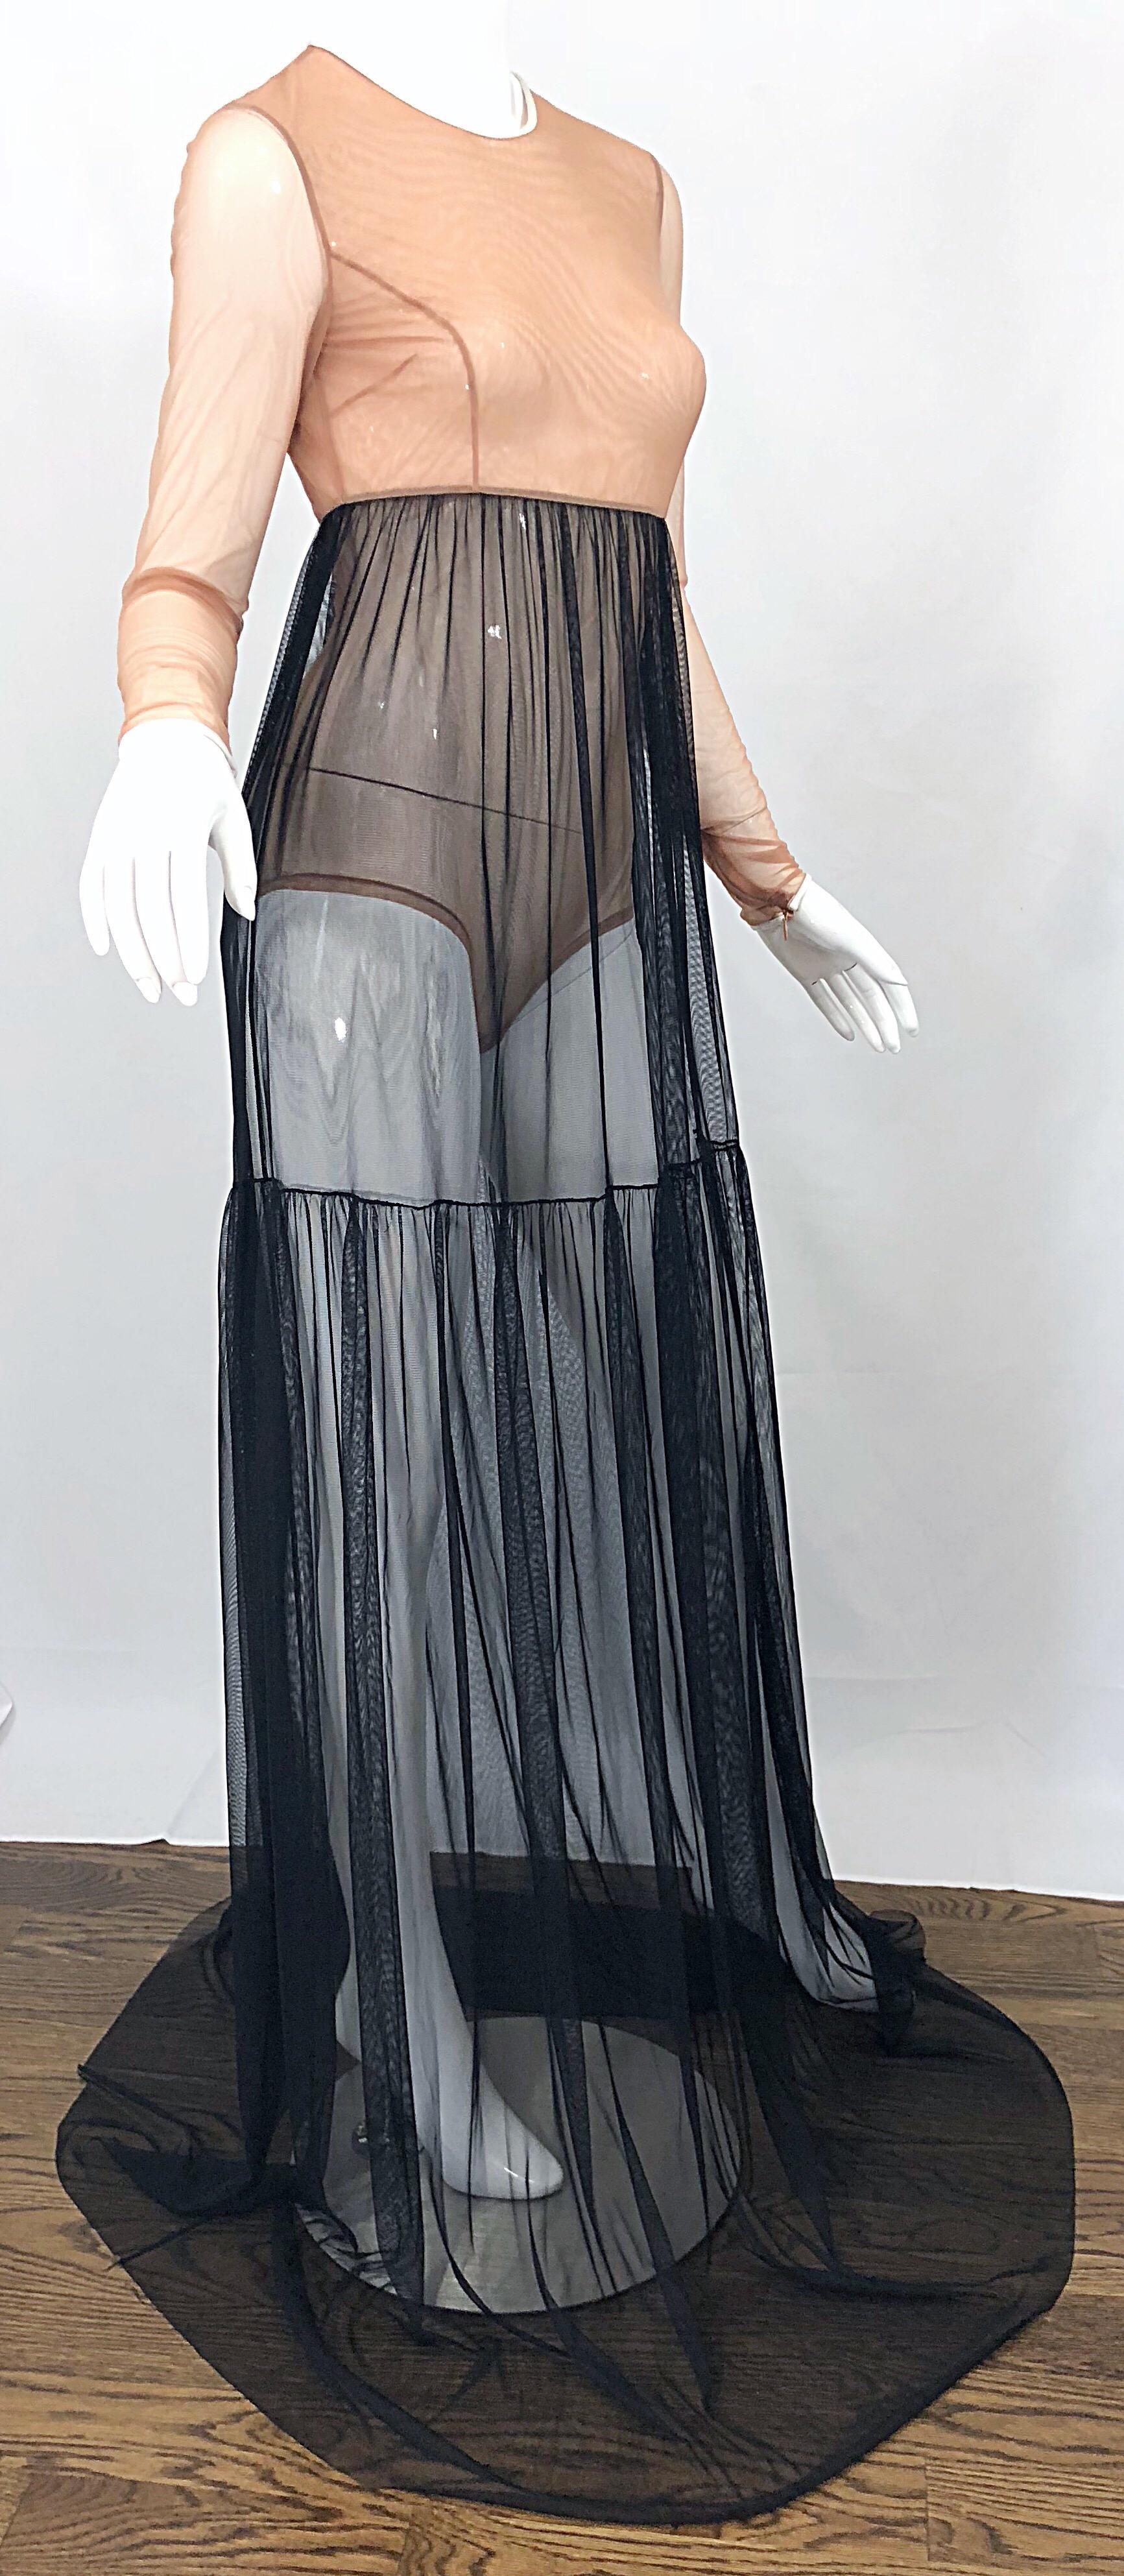 Michael Kors Collection Sz 4 Nude + Black Sheer Runway Mesh Bodysuit Gown Dress In Excellent Condition For Sale In San Diego, CA